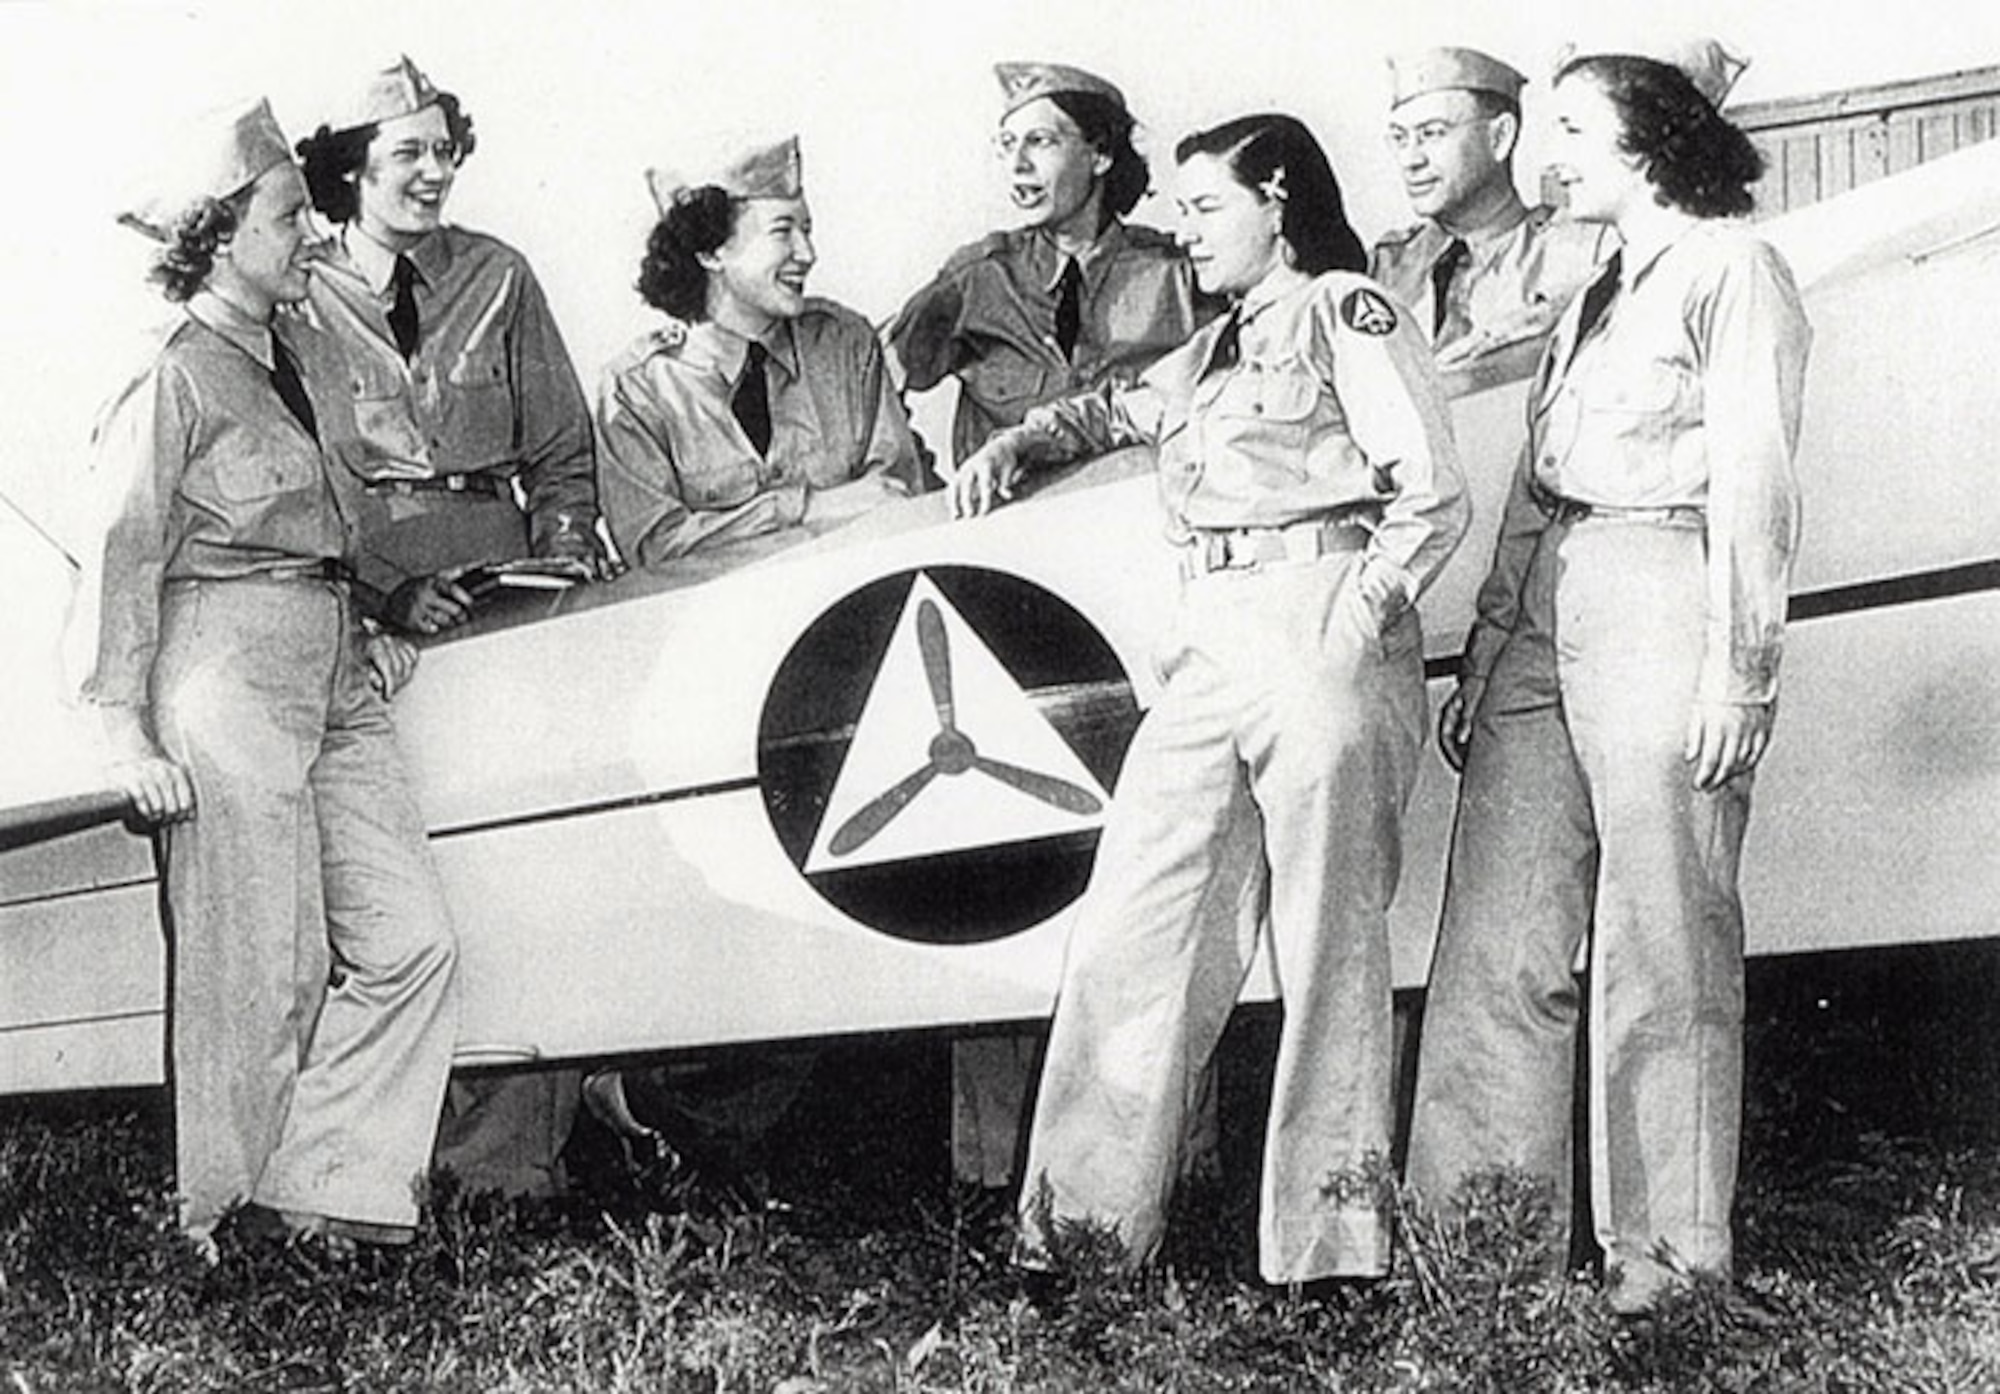 During the early days of World War II, the Civil Air Patrol played an important part as an Army Air Corps auxiliary program. For their efforts, the House of Representatives passed legislation to award the Civil Air Patrol the Congressional Gold Medal.